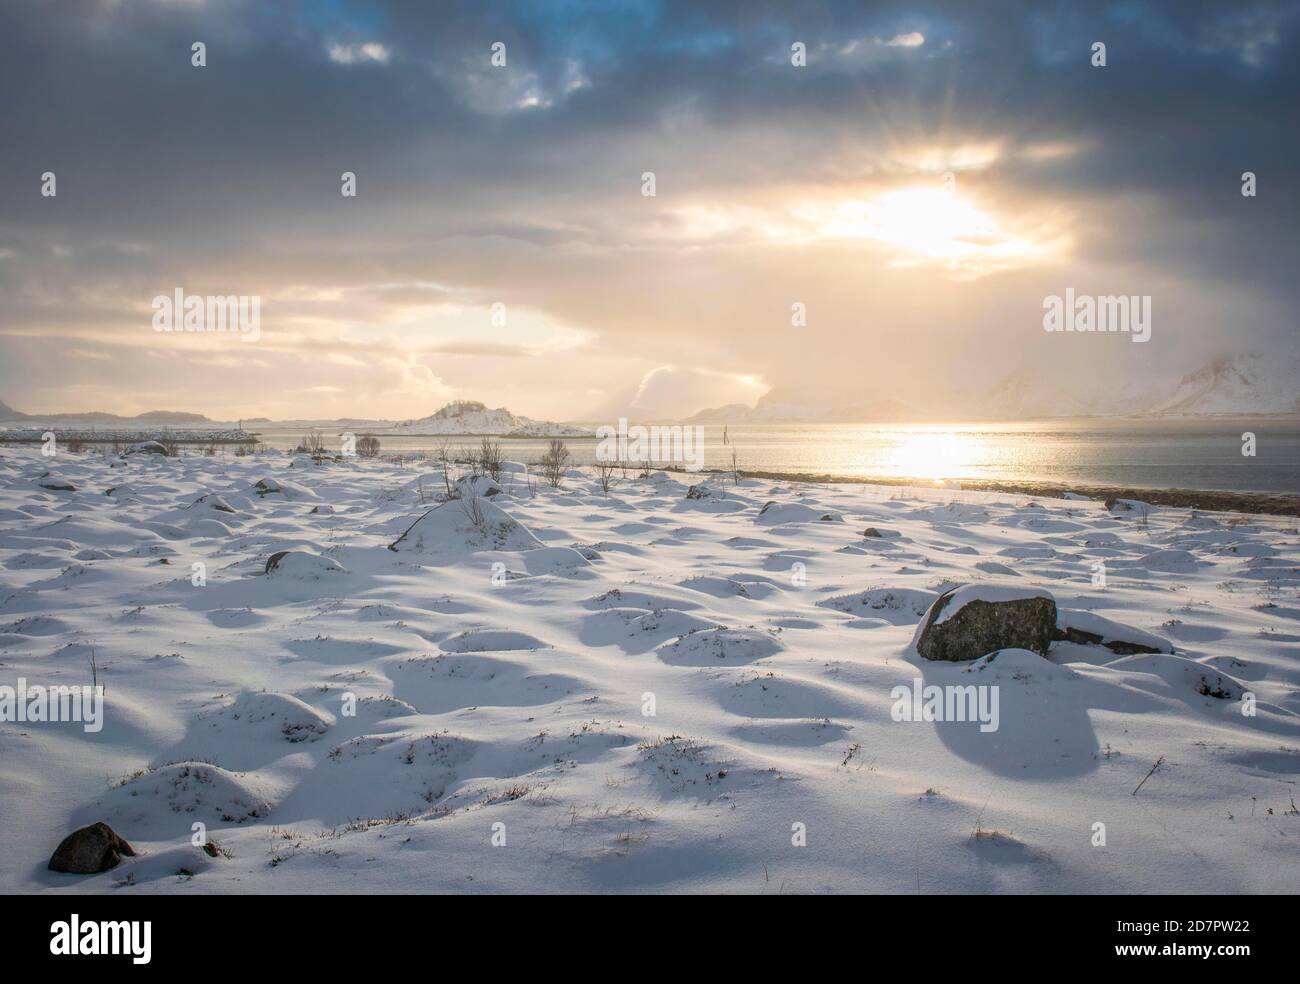 Snowy landscape at sea and fjord, cloud atmosphere, warm sunlight, Nordland, Lofoten, Norway Stock Photo